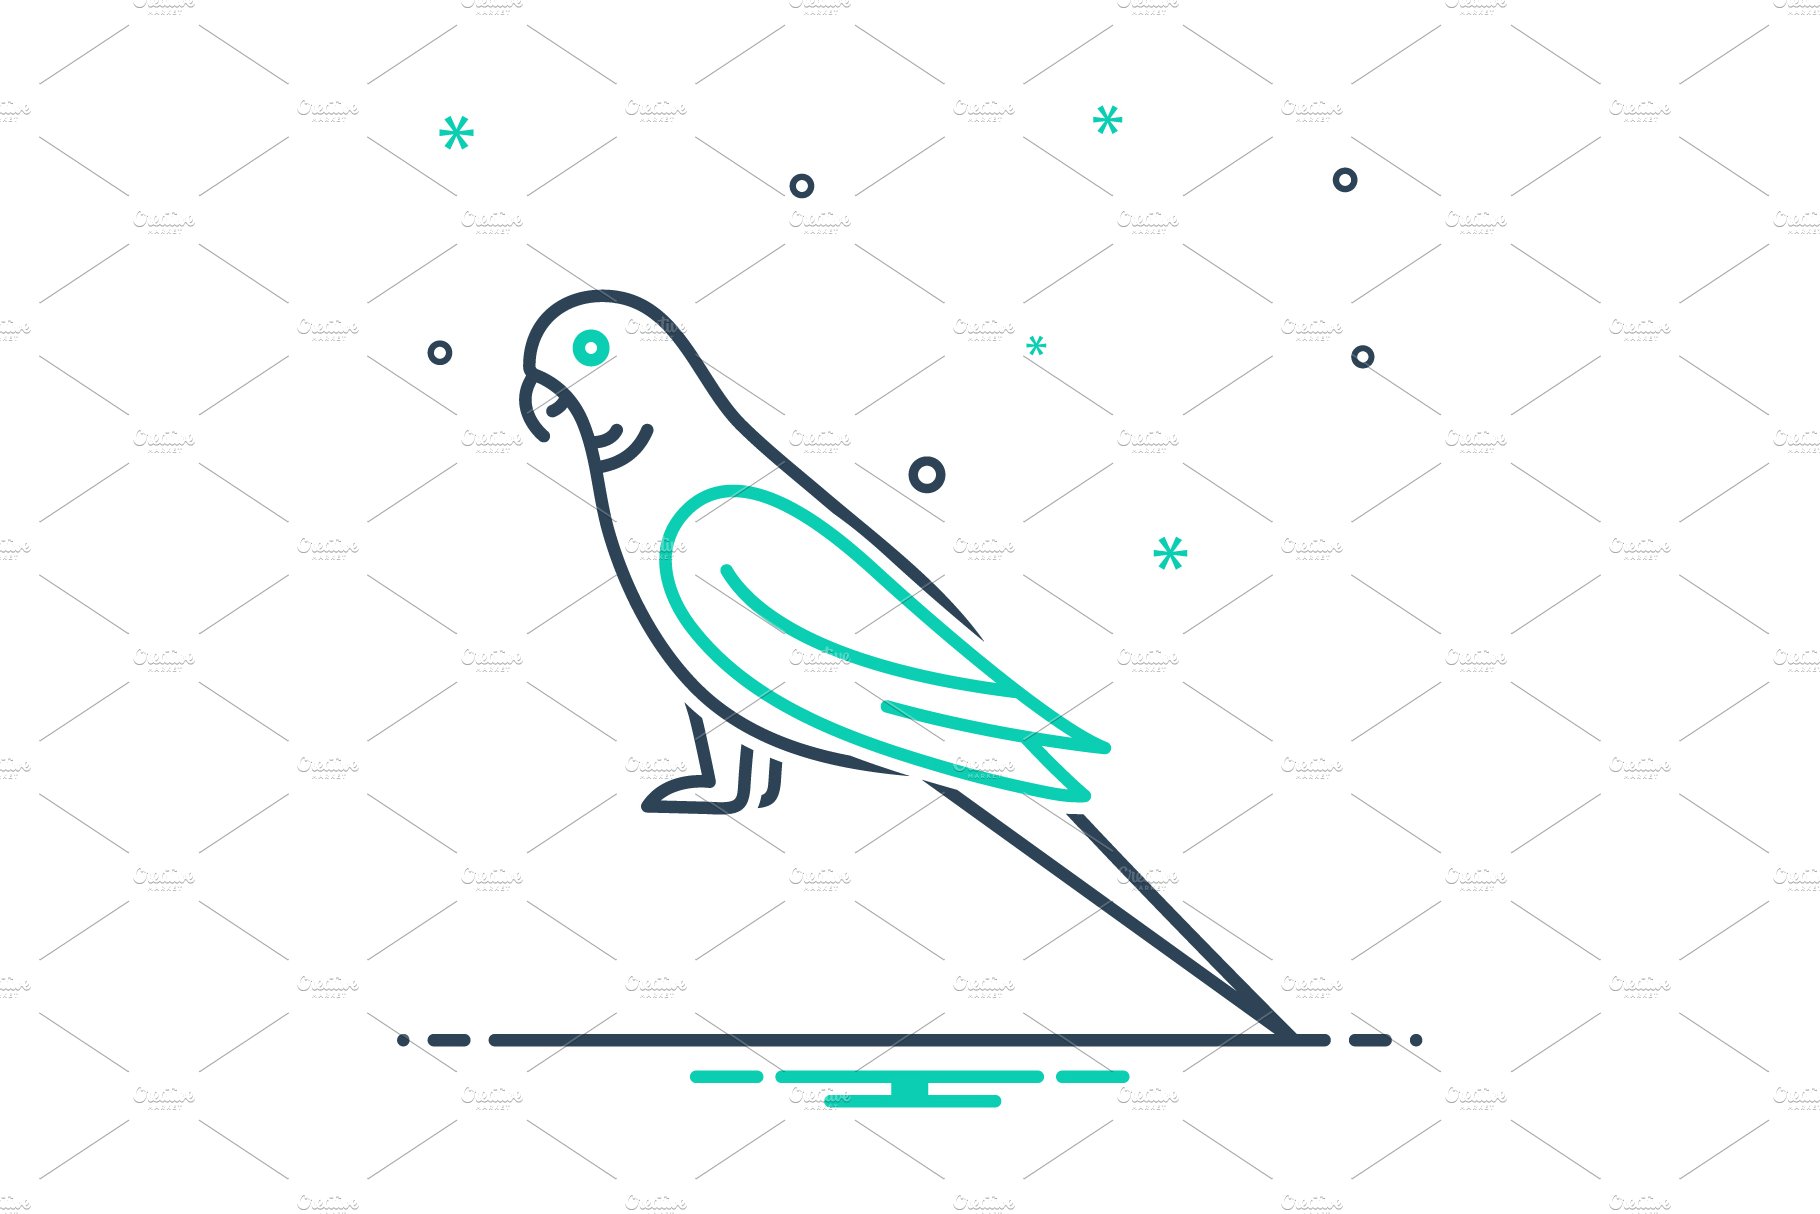 Parrot lovebird icon cover image.